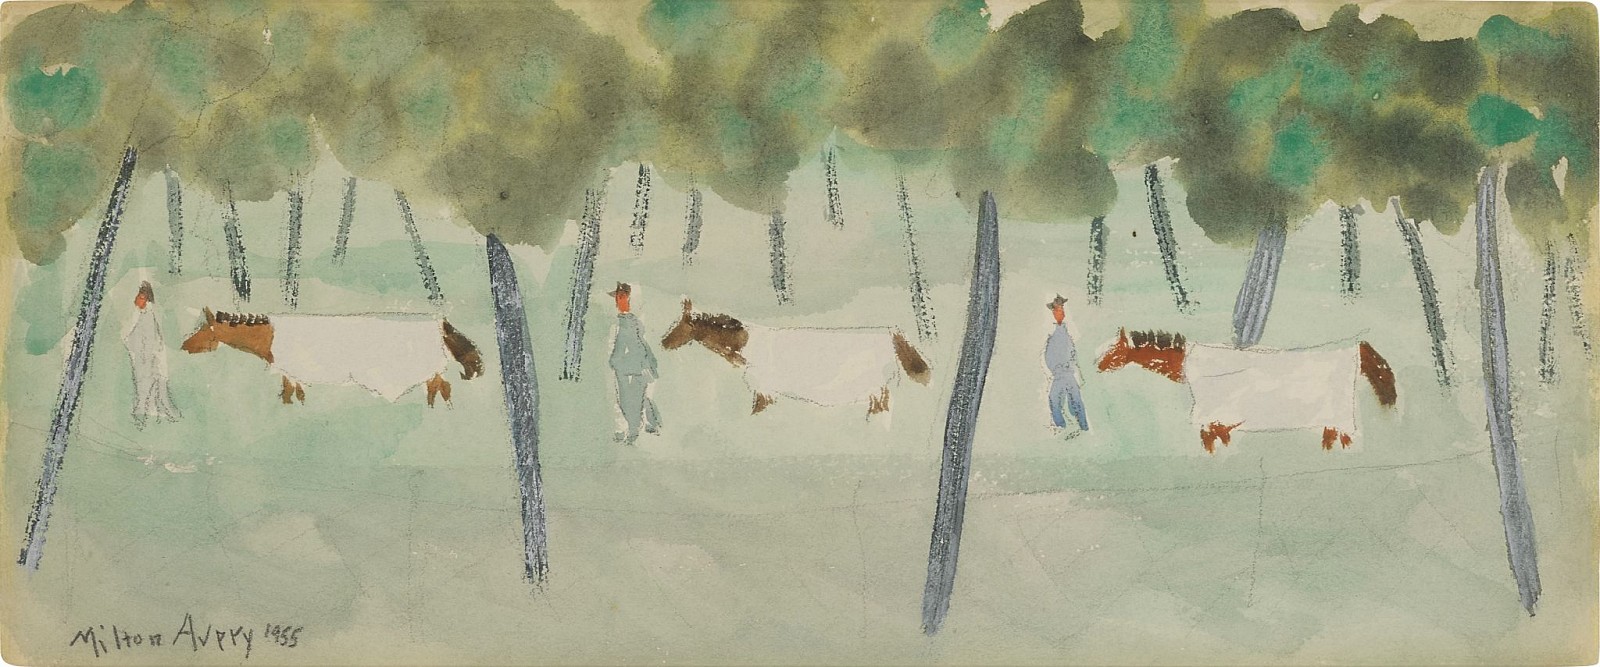 Milton Avery, Horses with Blankets, 1955
watercolor and pencil on paper, 7 x 16 1/2 in. (17.8 x 41.9 cm)
MA221001